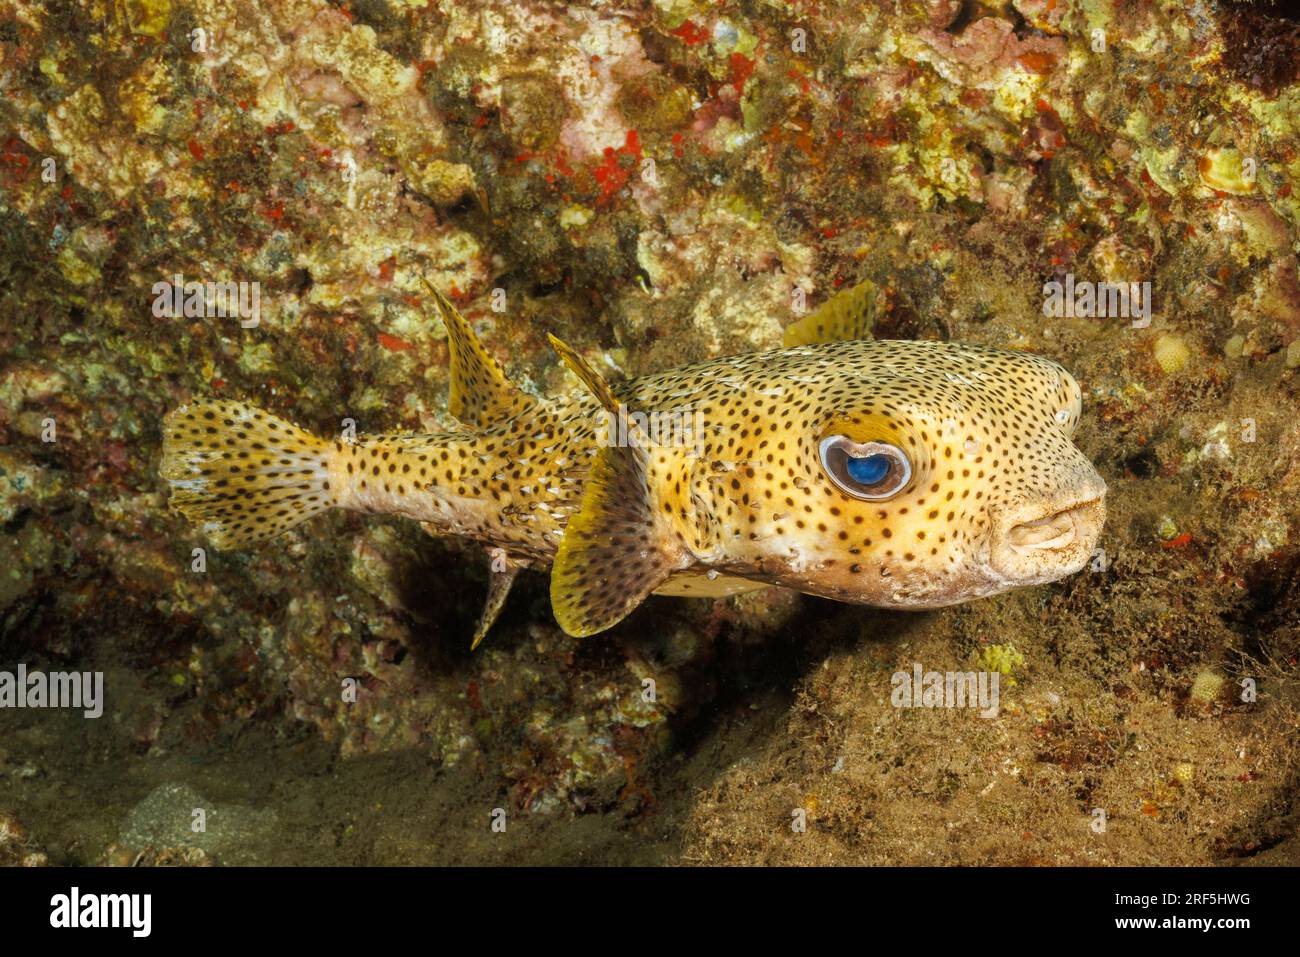 The spotted porcupinefish, Diodon hystrix, feed primarily at night on hard shelled invertebrates.  Hawaii. Stock Photo